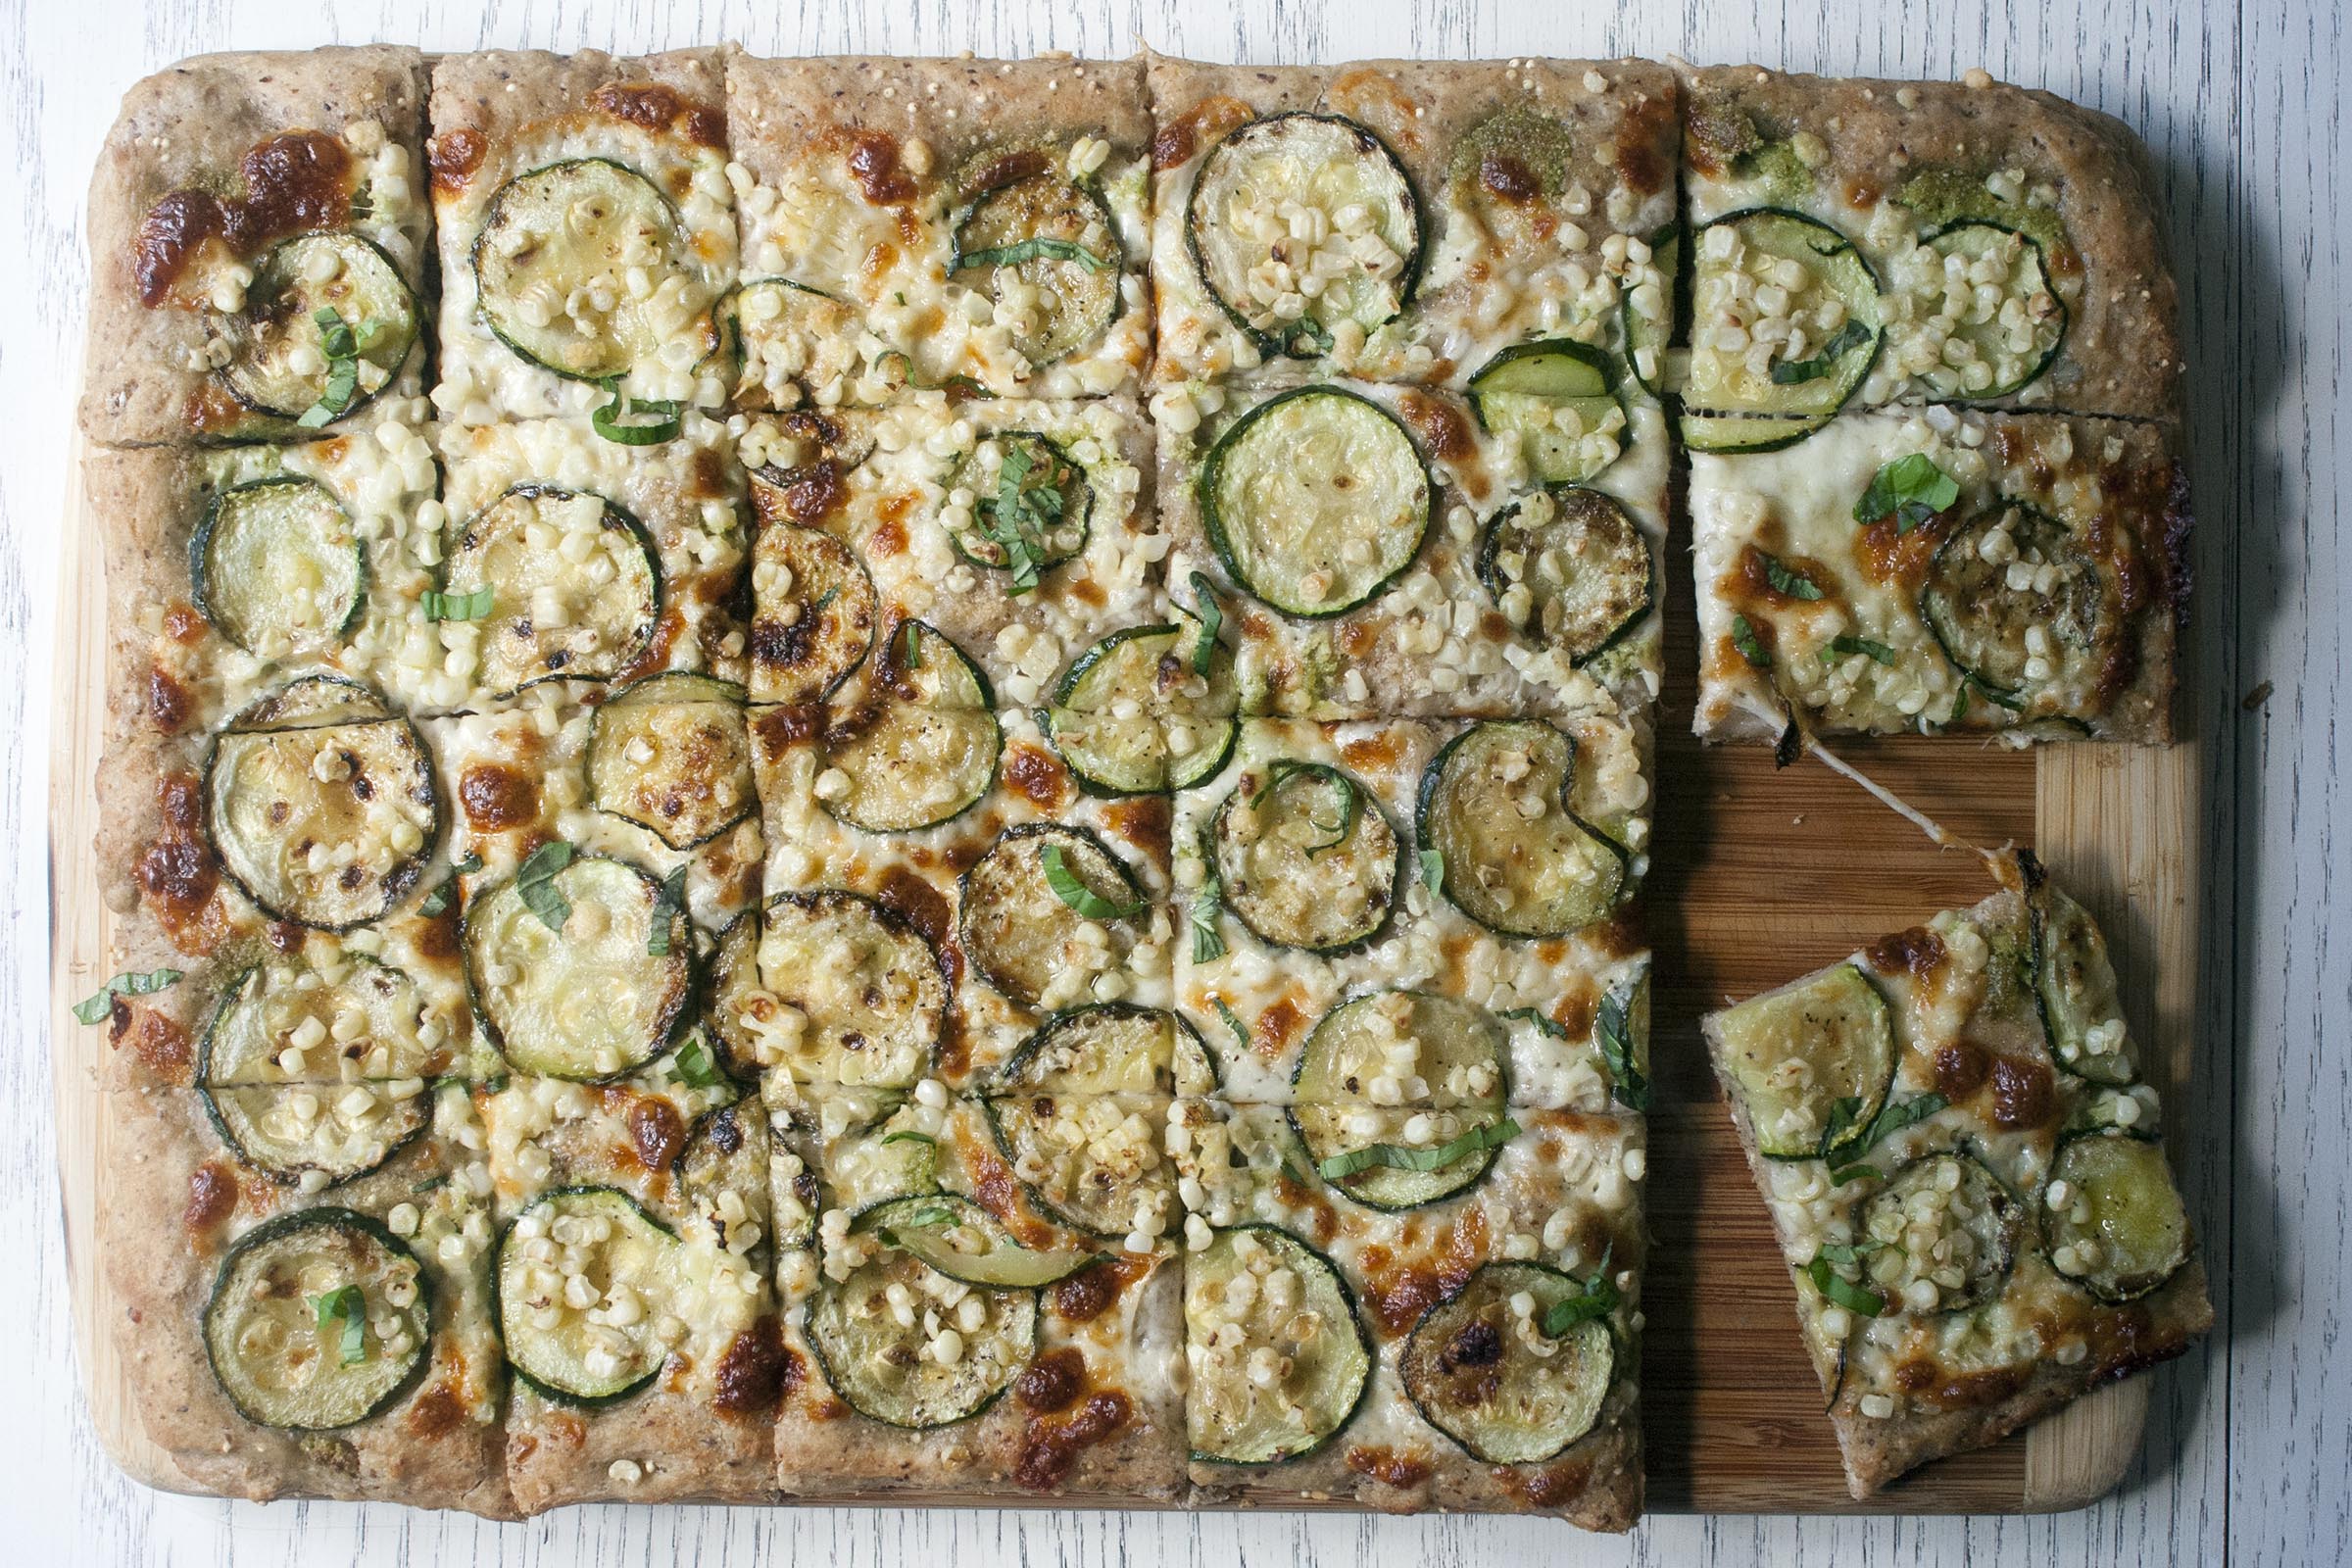 Baked Whole Wheat Millet and Flaxseed Pizza with Garlic Scape Pesto, Zucchini and Corn. www.lifeaswecookit.com